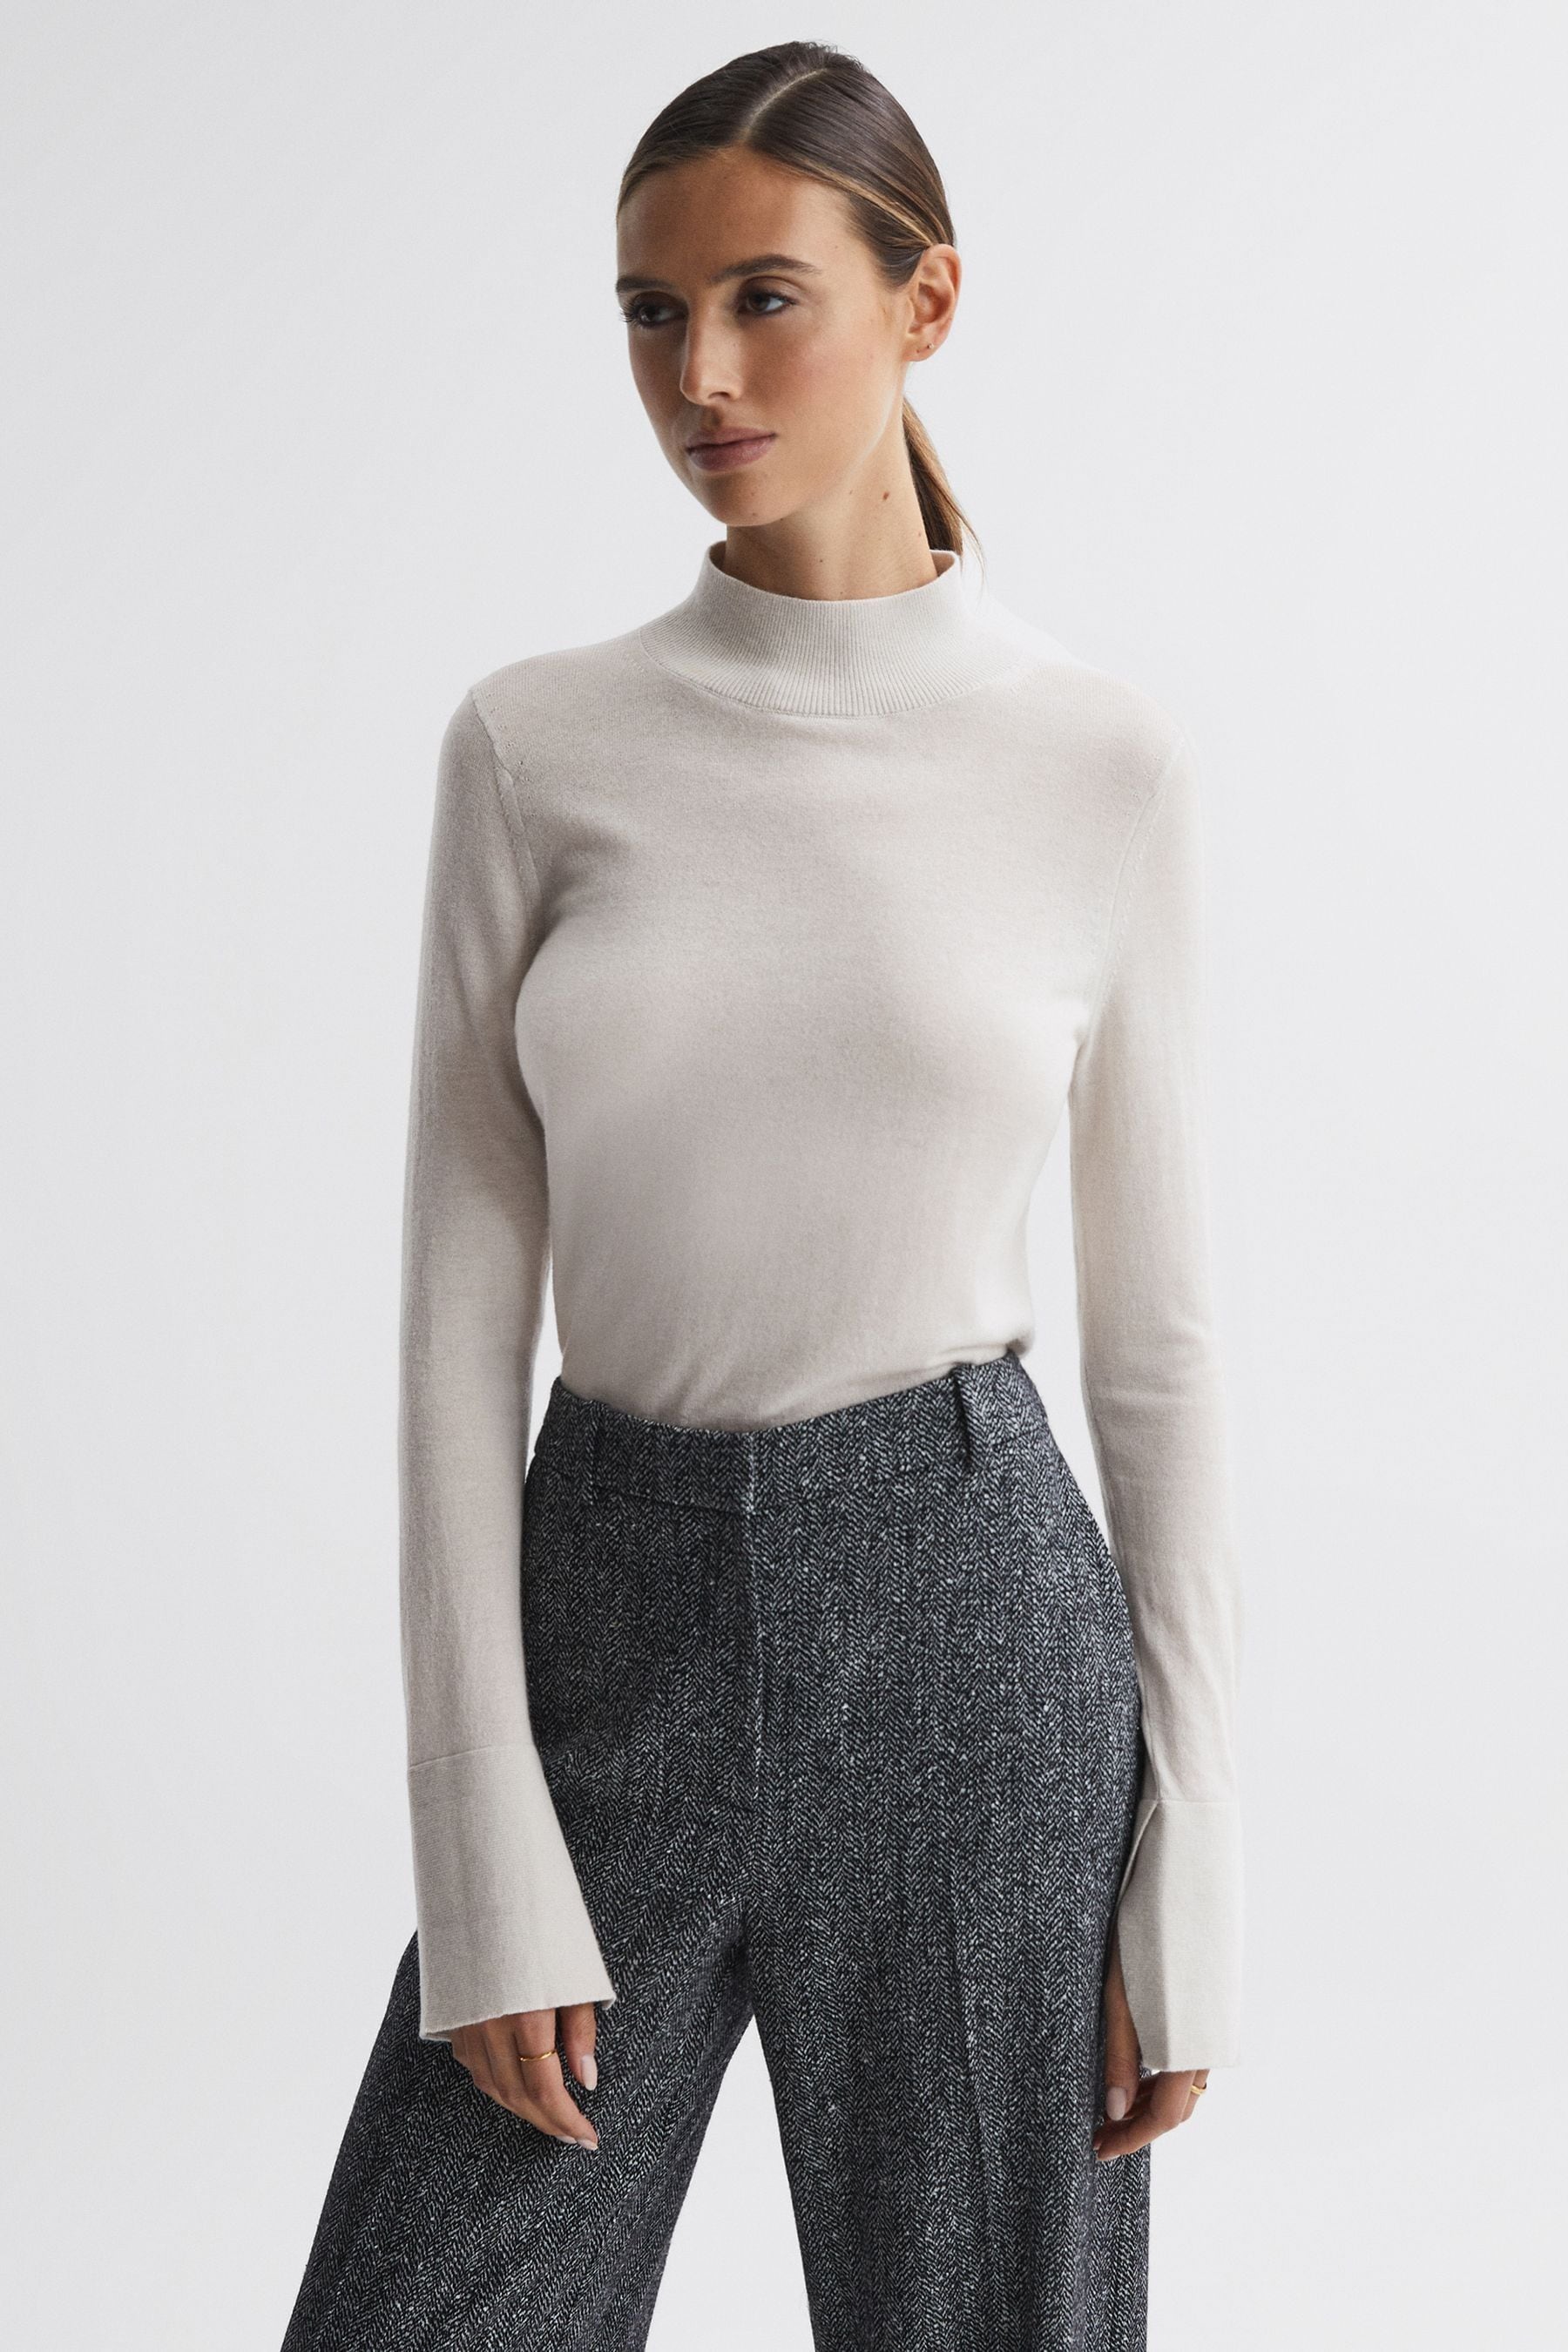 Reiss Kylie - Stone Merino Wool Fitted Funnel Neck Top, Xs